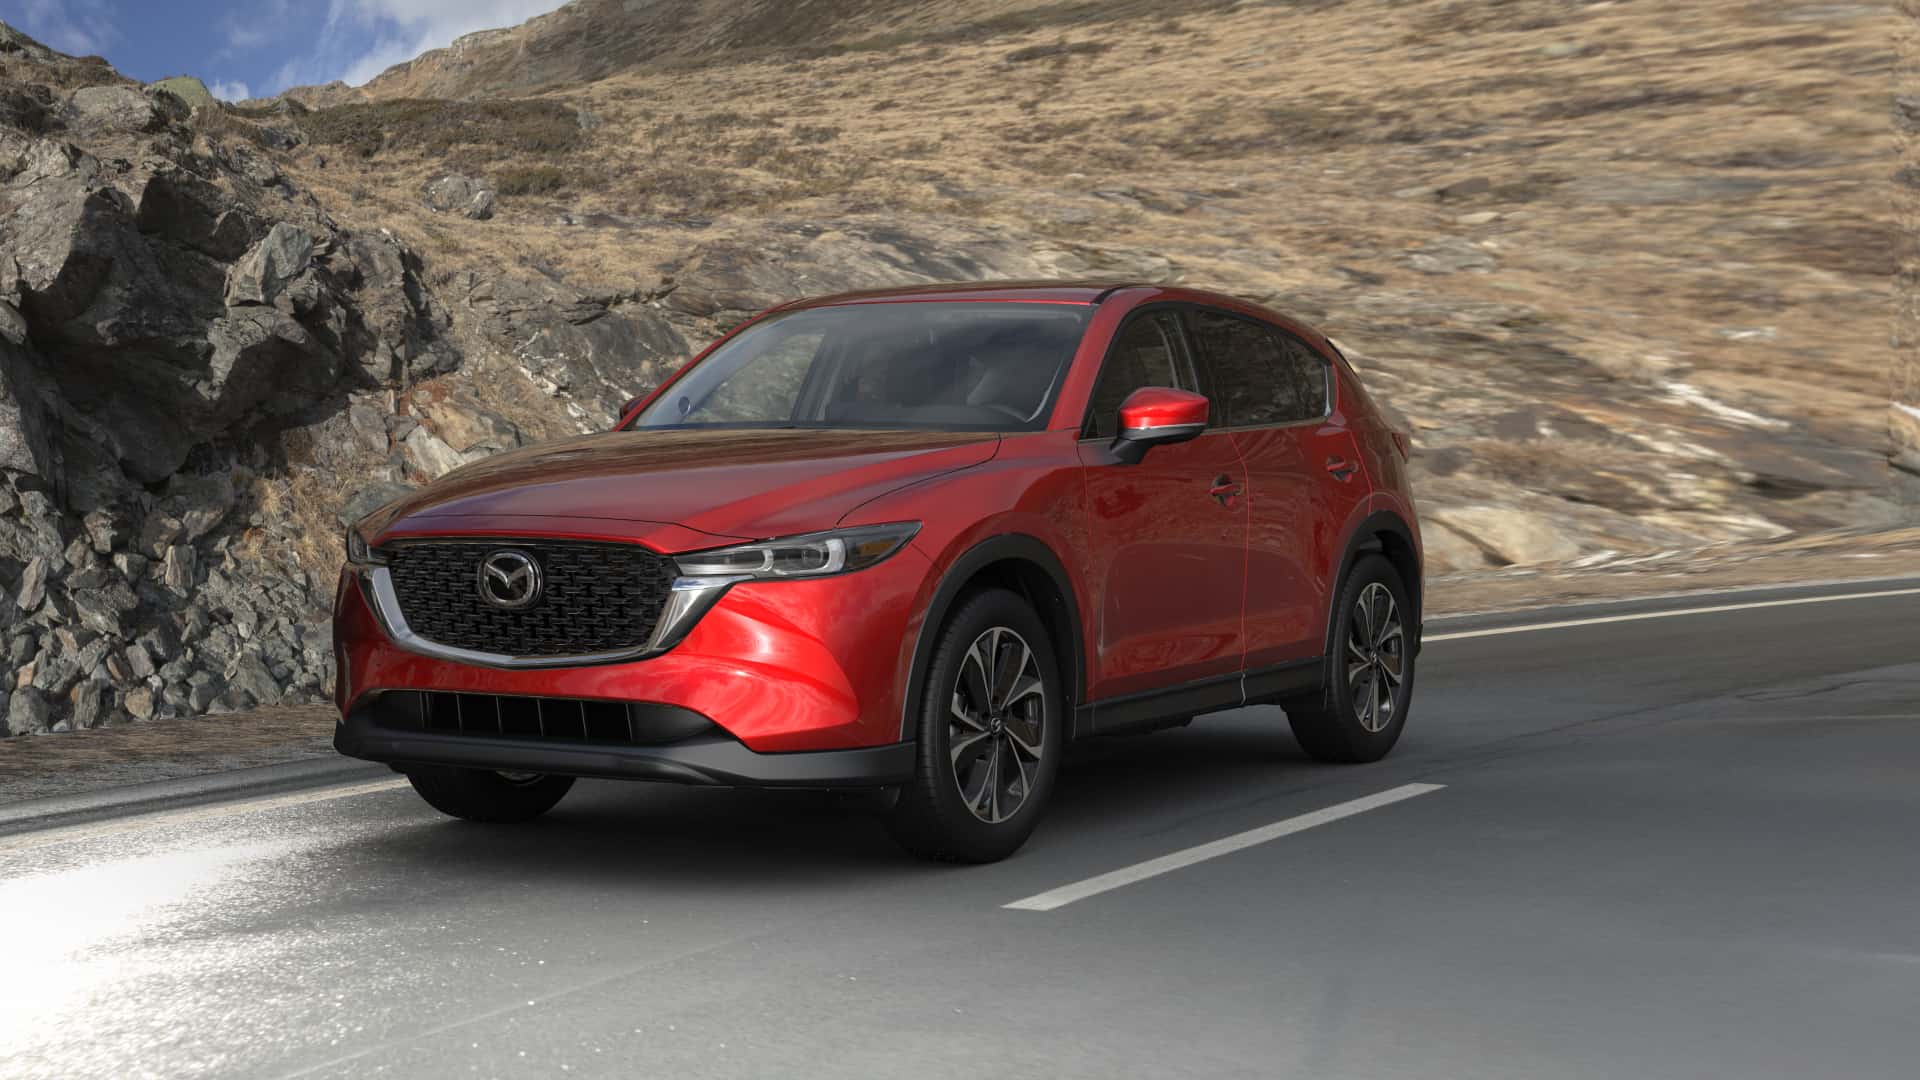 2023 Mazda CX-5 2.5 S Premium Soul Red Crystal Metallic | Bommarito Mazda St. Peters in St. Peters MO